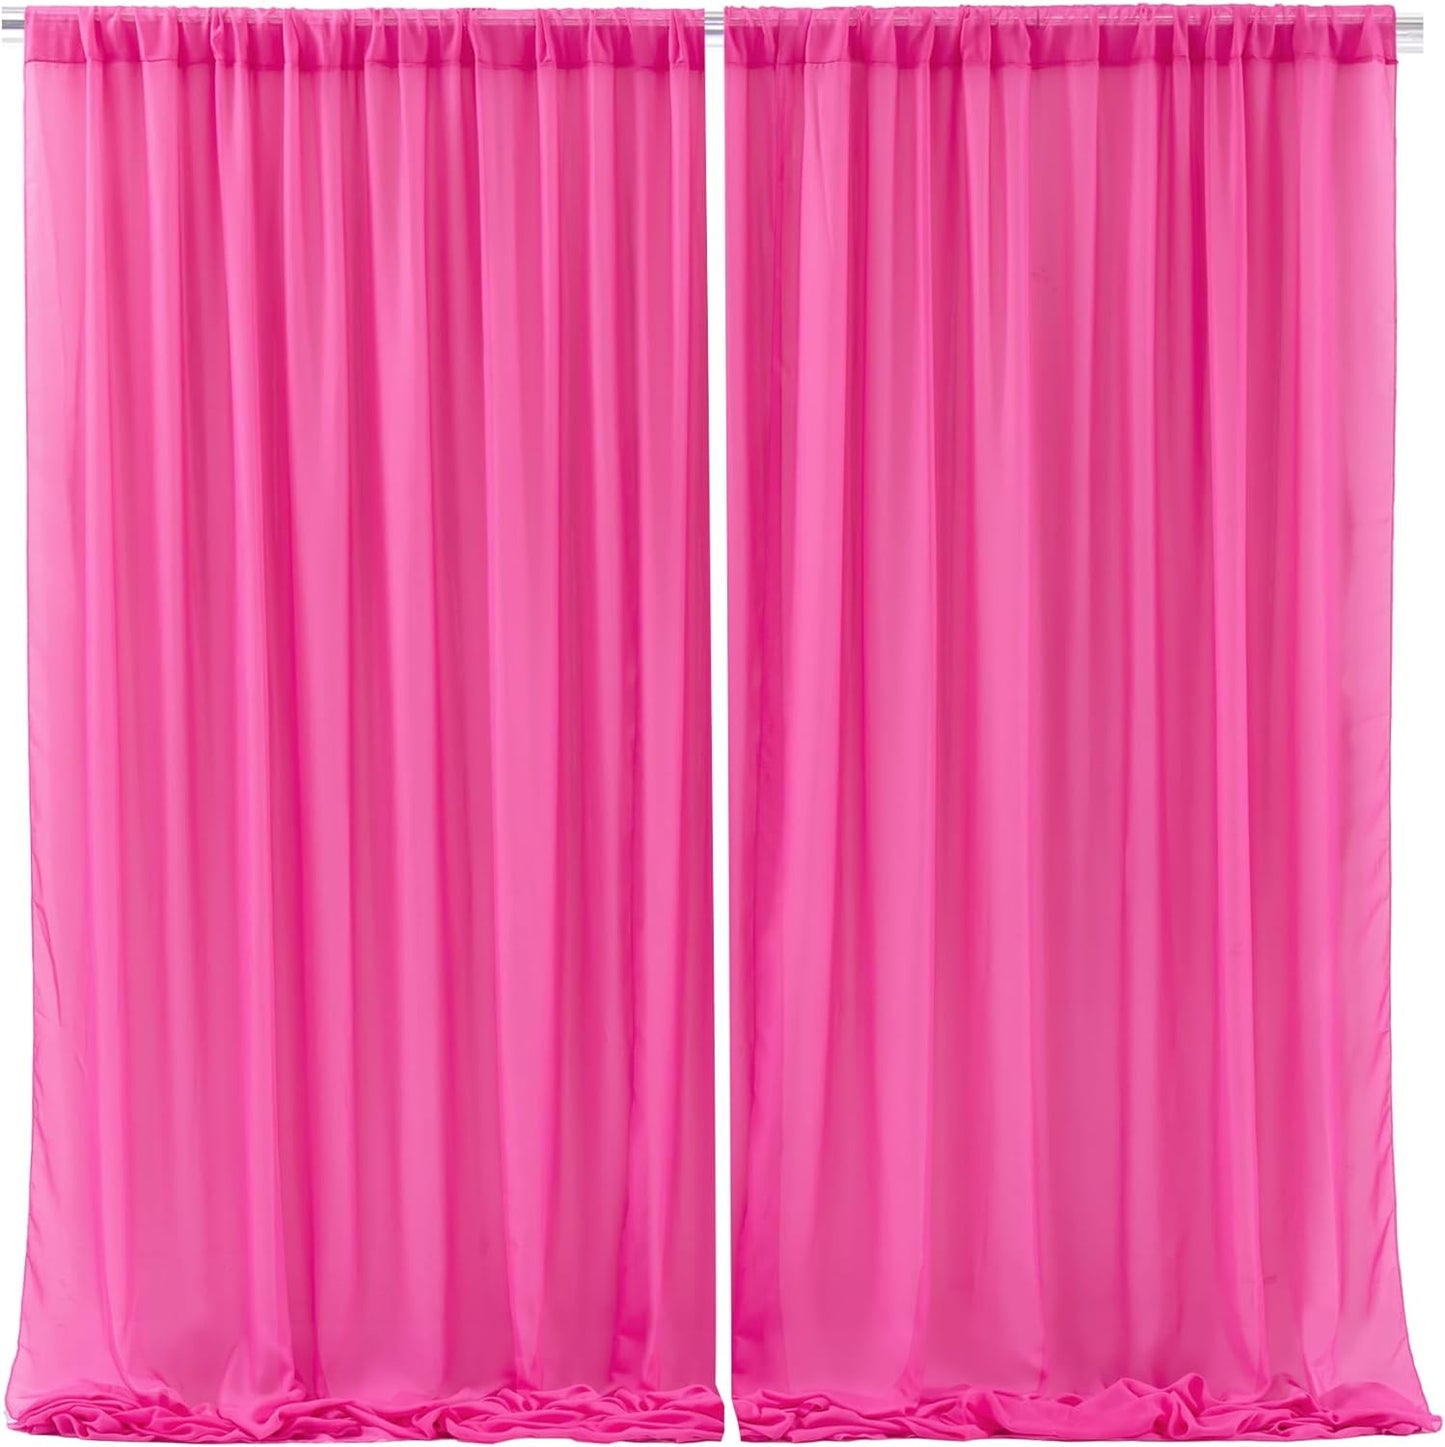 10Ft X 10Ft White Chiffon Backdrop Curtains, Wrinkle-Free Sheer Chiffon Fabric Curtain Drapes for Wedding Ceremony Arch Party Stage Decoration  Wish Care Hot Pink  